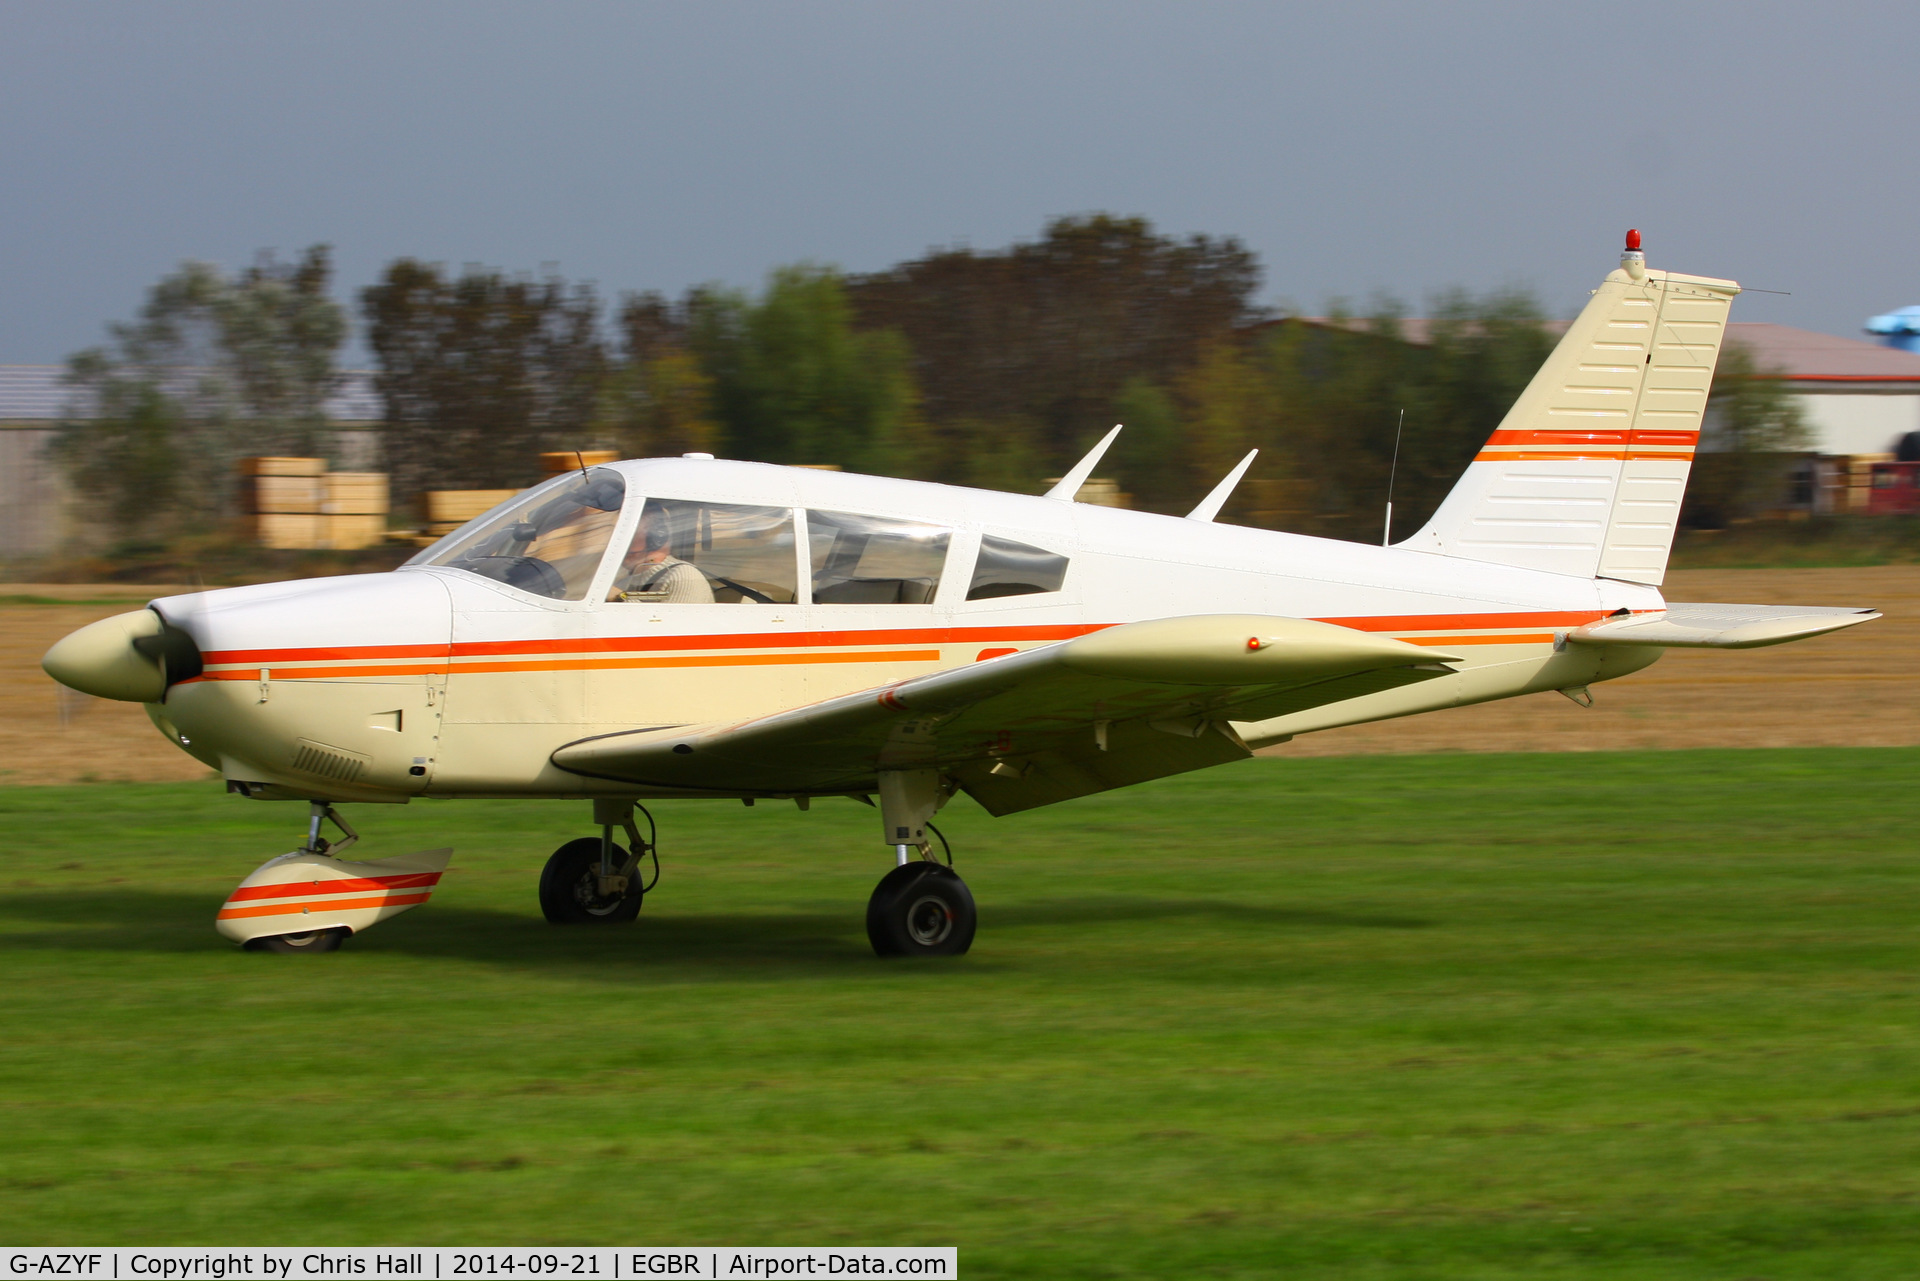 G-AZYF, 1968 Piper PA-28-180 Cherokee C/N 28-5227, at Breighton's Heli Fly-in, 2014